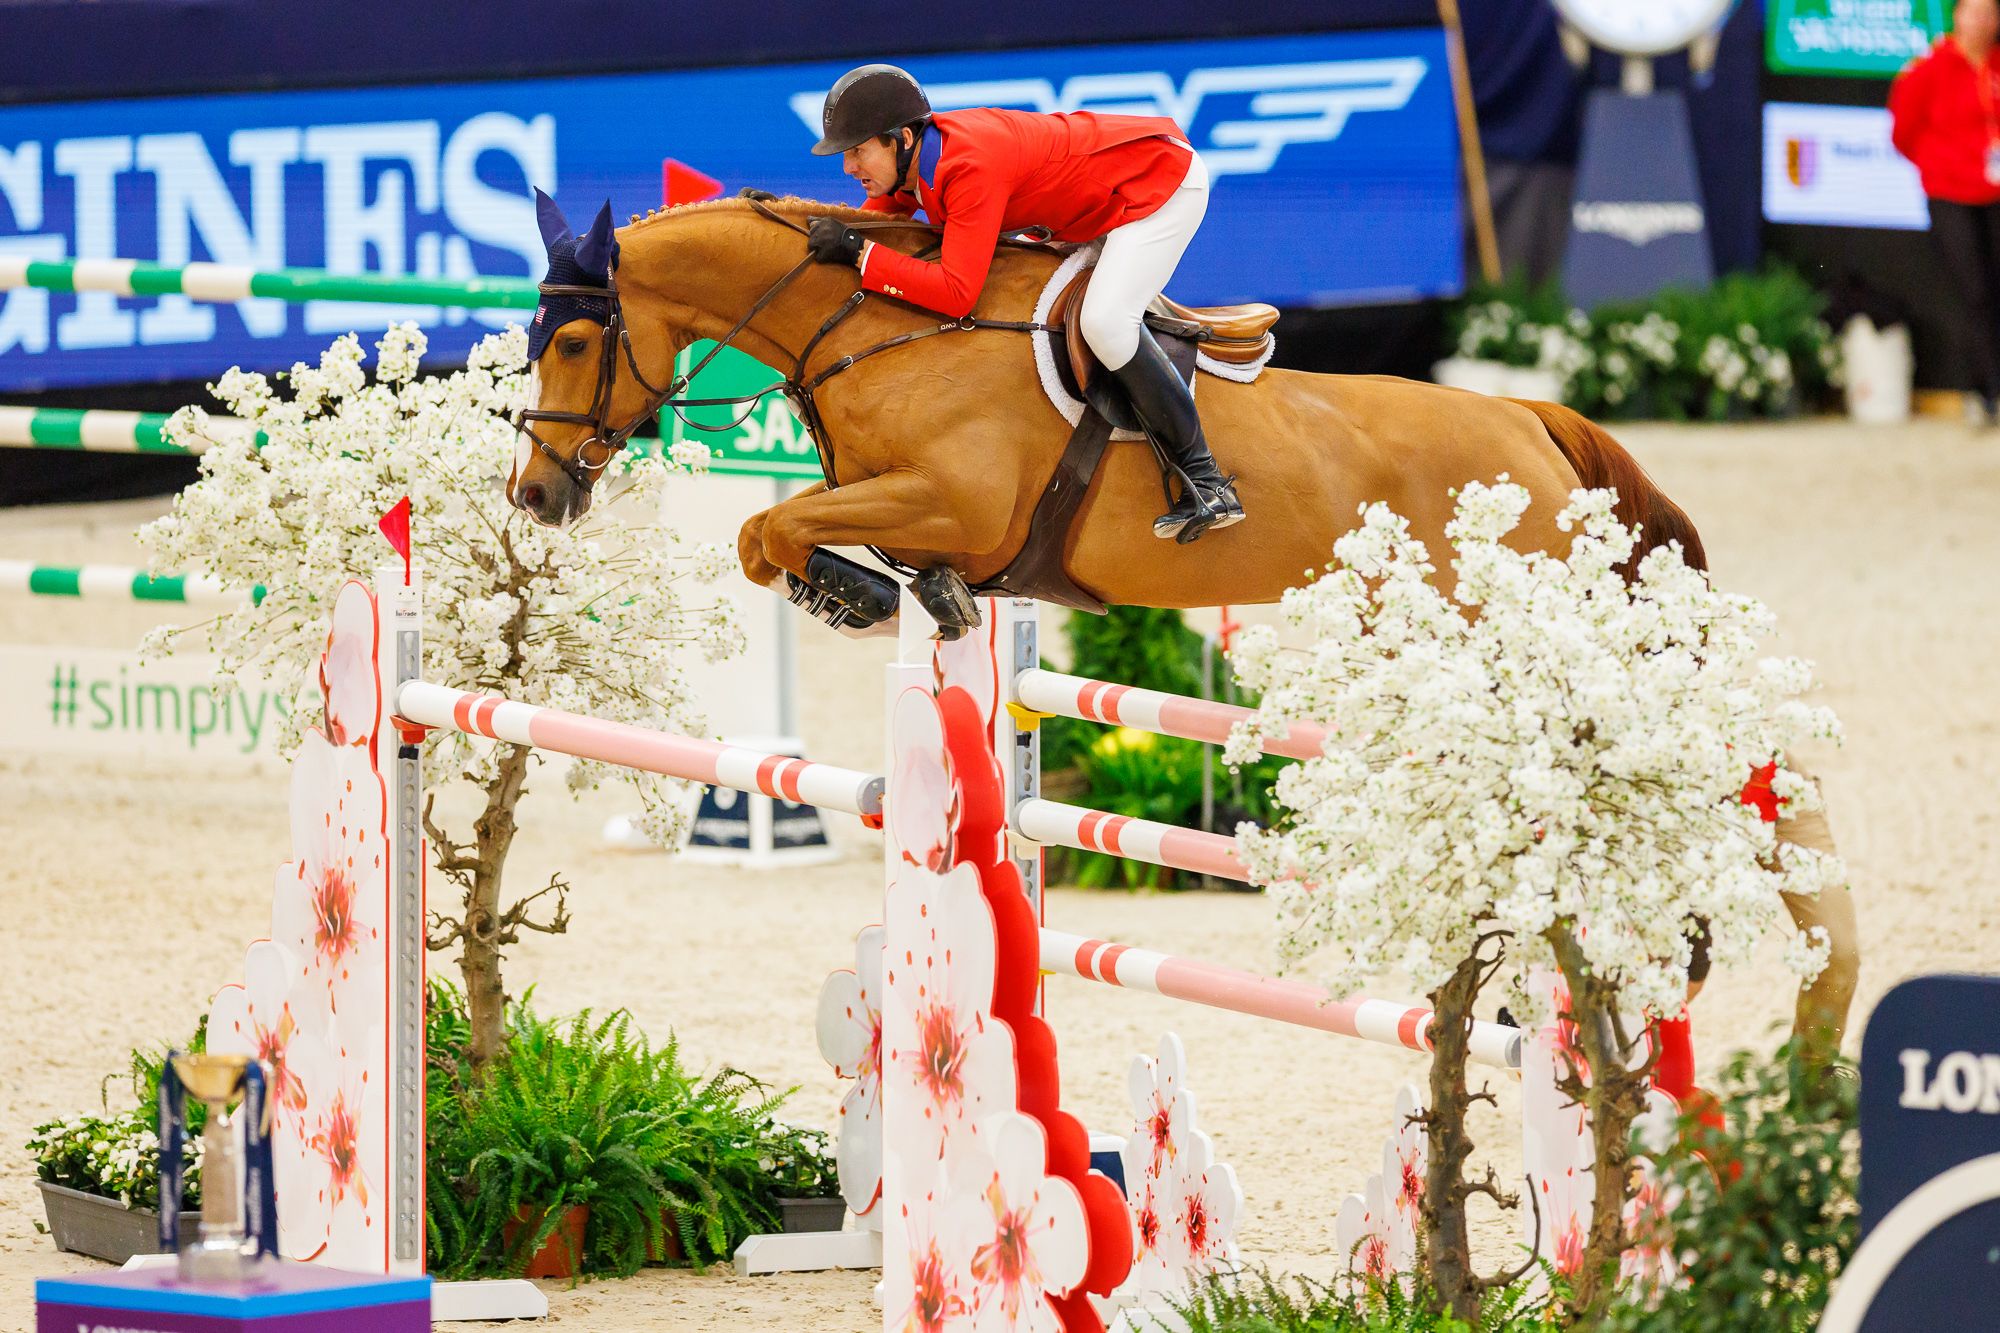 McLain Ward and Contagious win second round of Longines FEI World Cup Final II in Leipzig